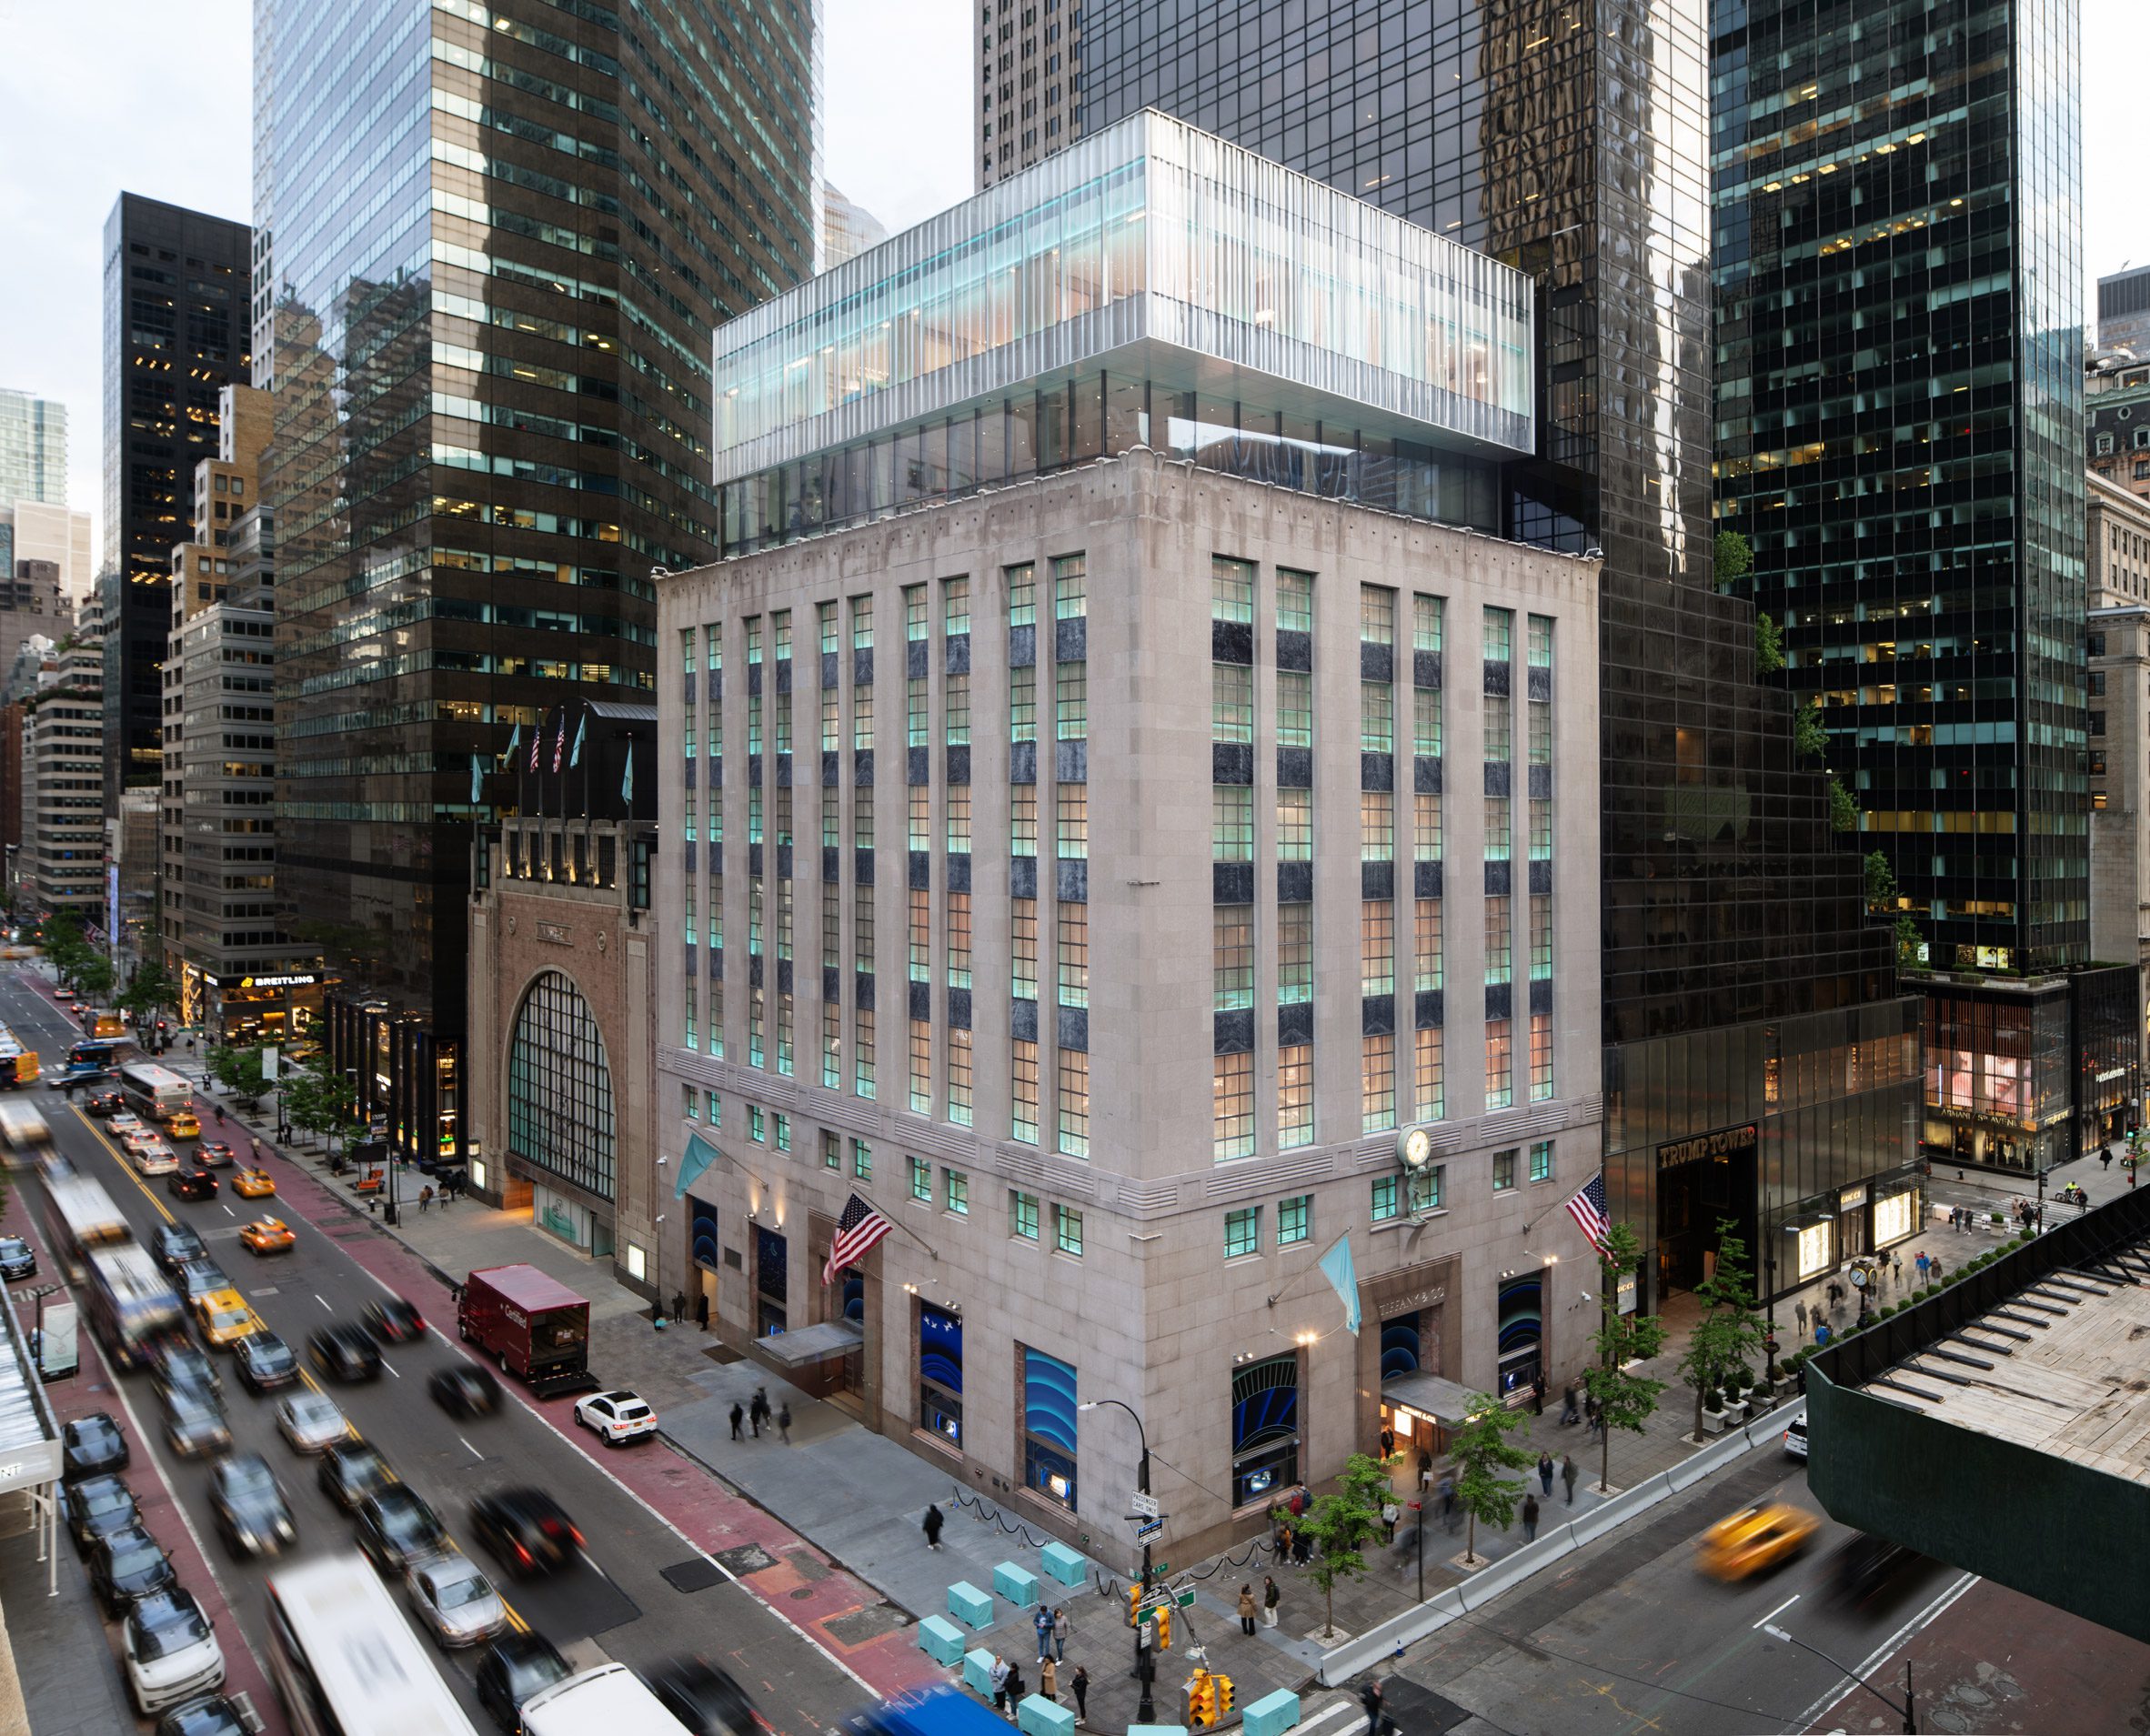 Tiffany building on 5th Avenue with OMA additition